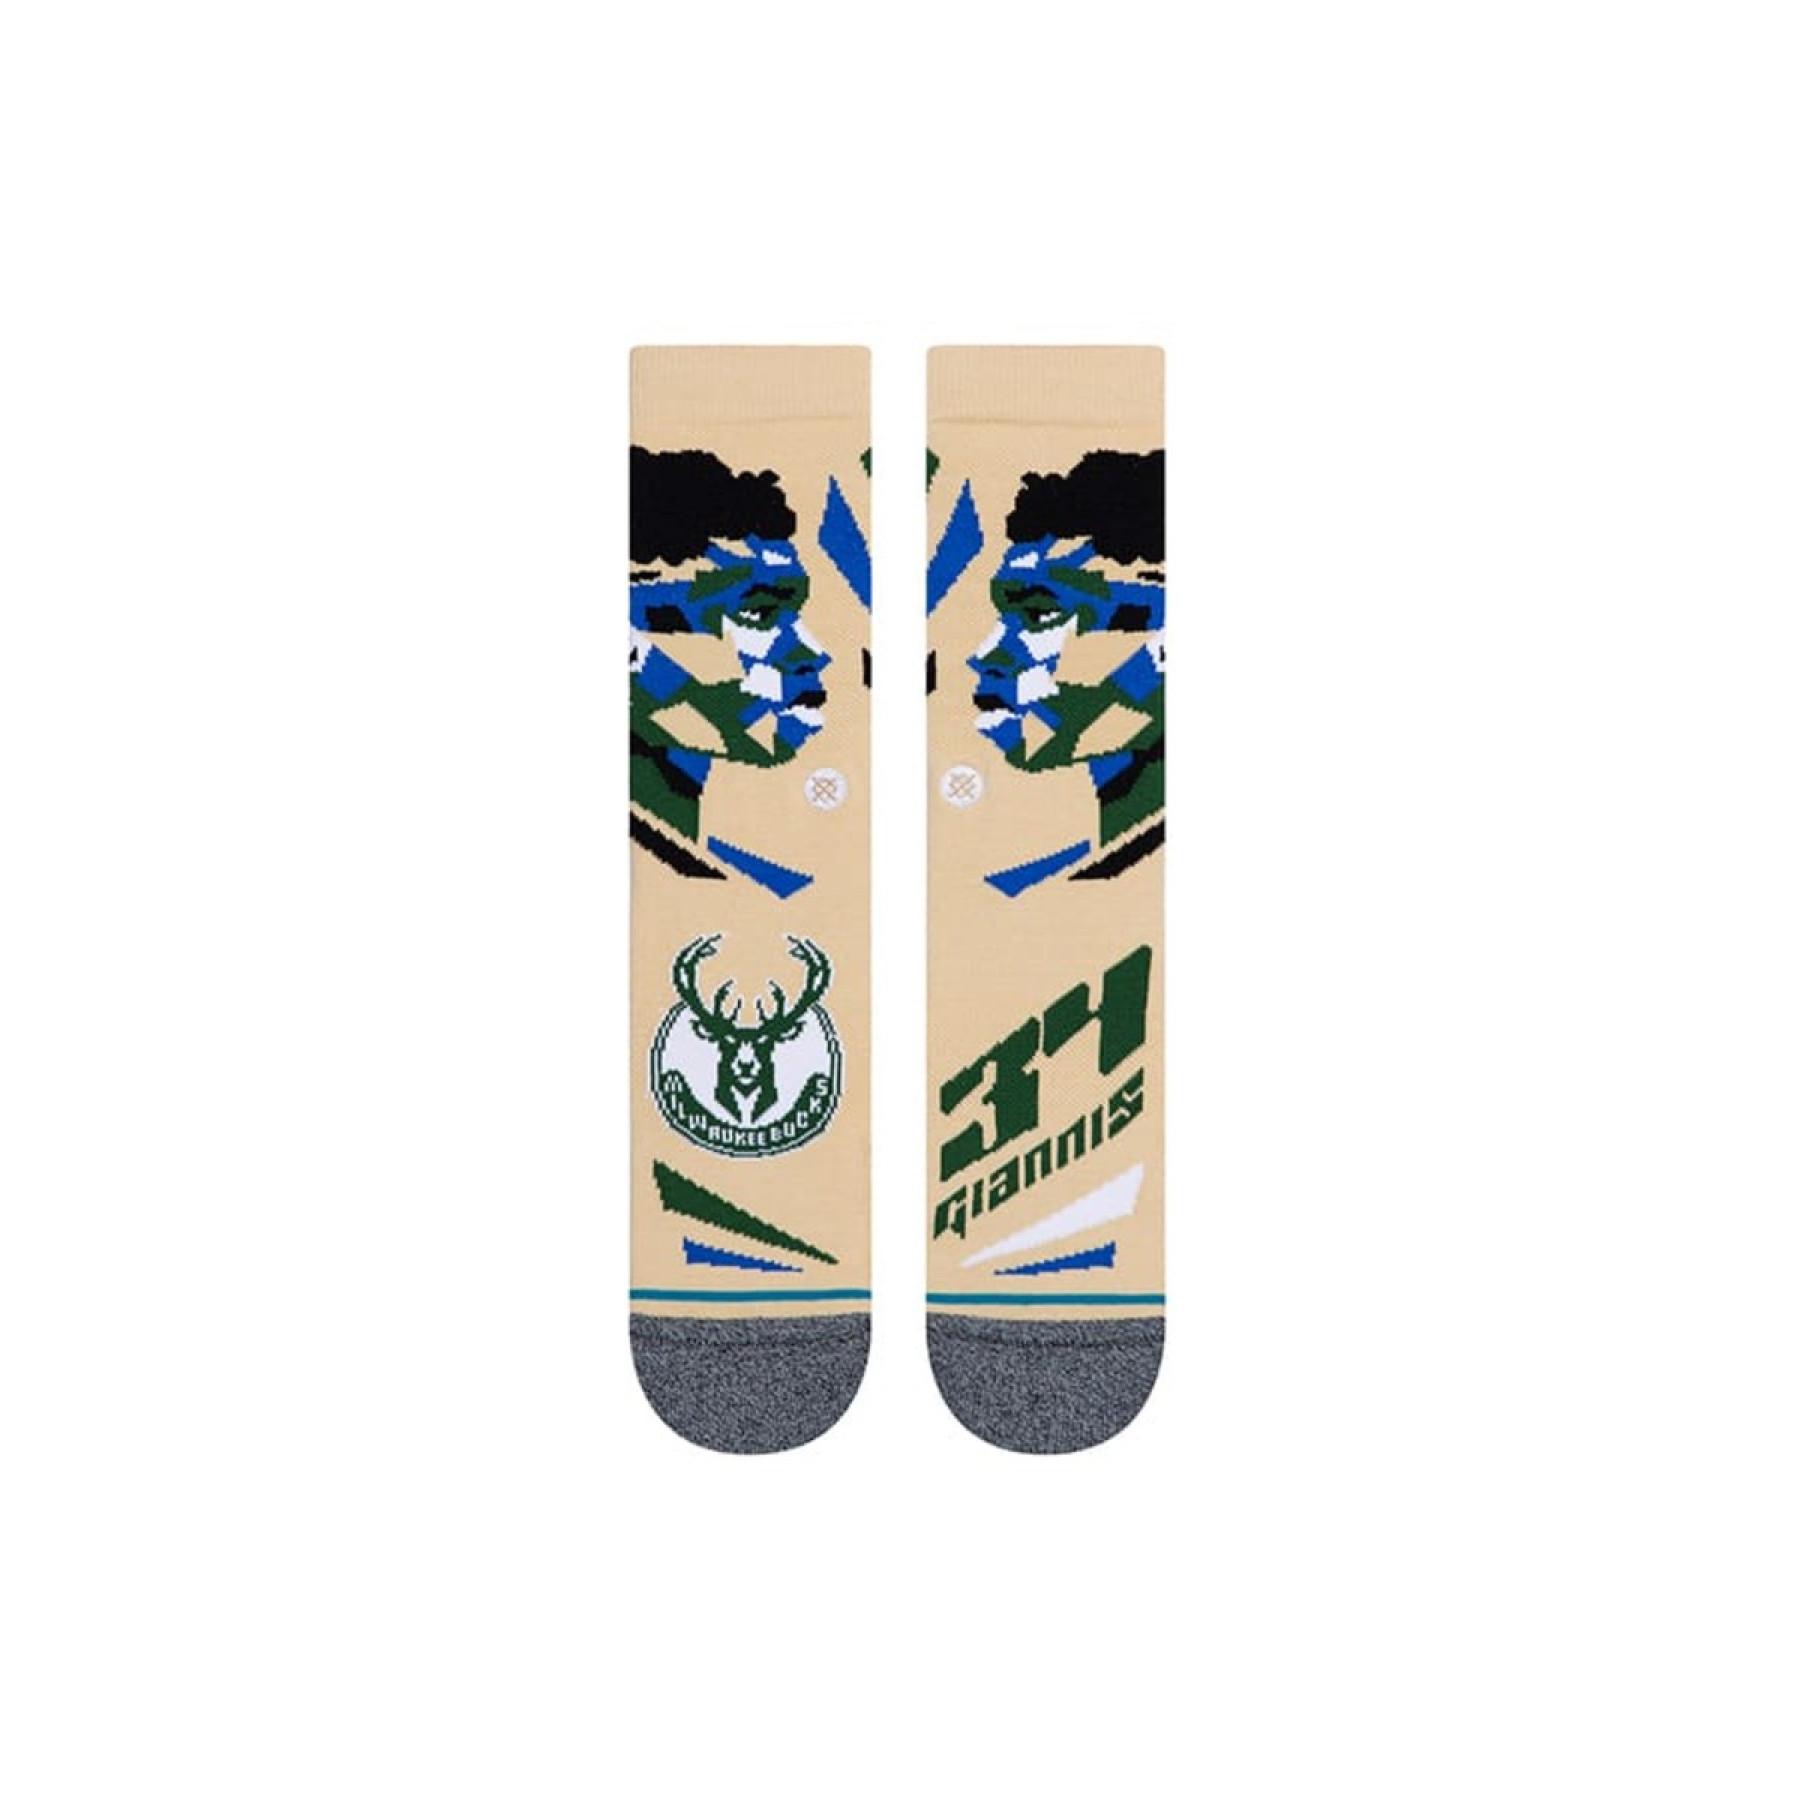 Chaussettes NBA Giannis